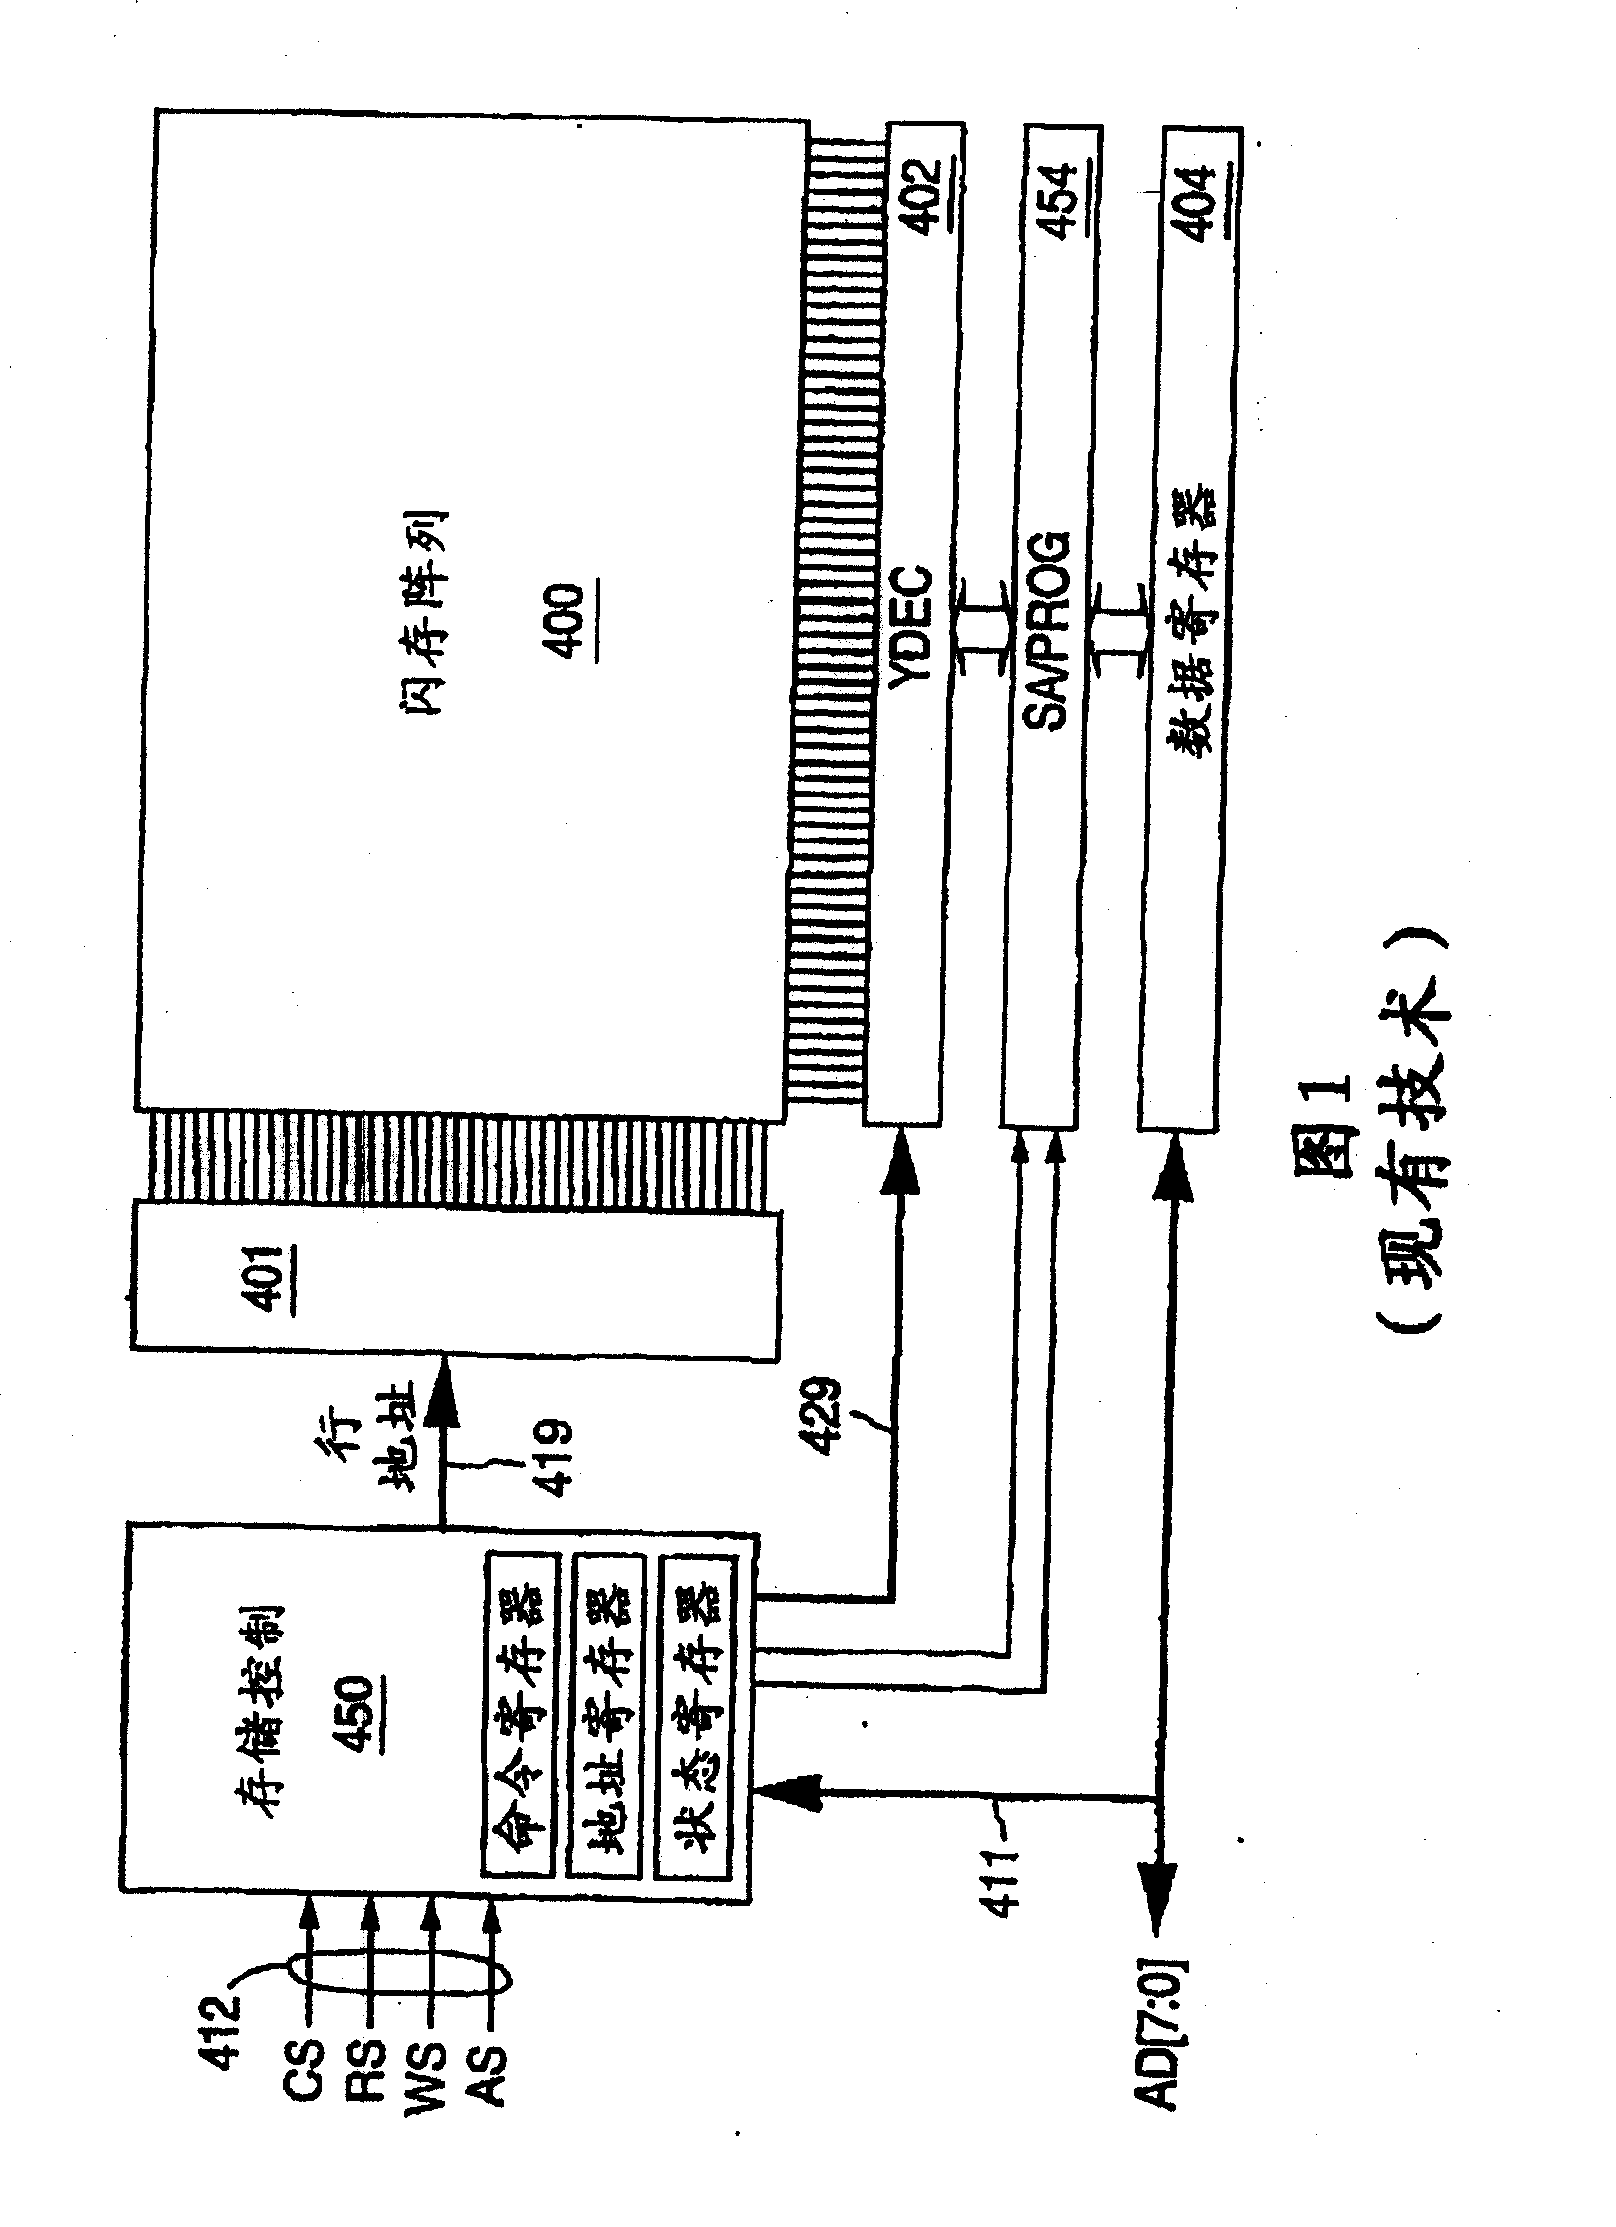 Non-volatile memory system and method for operating the same